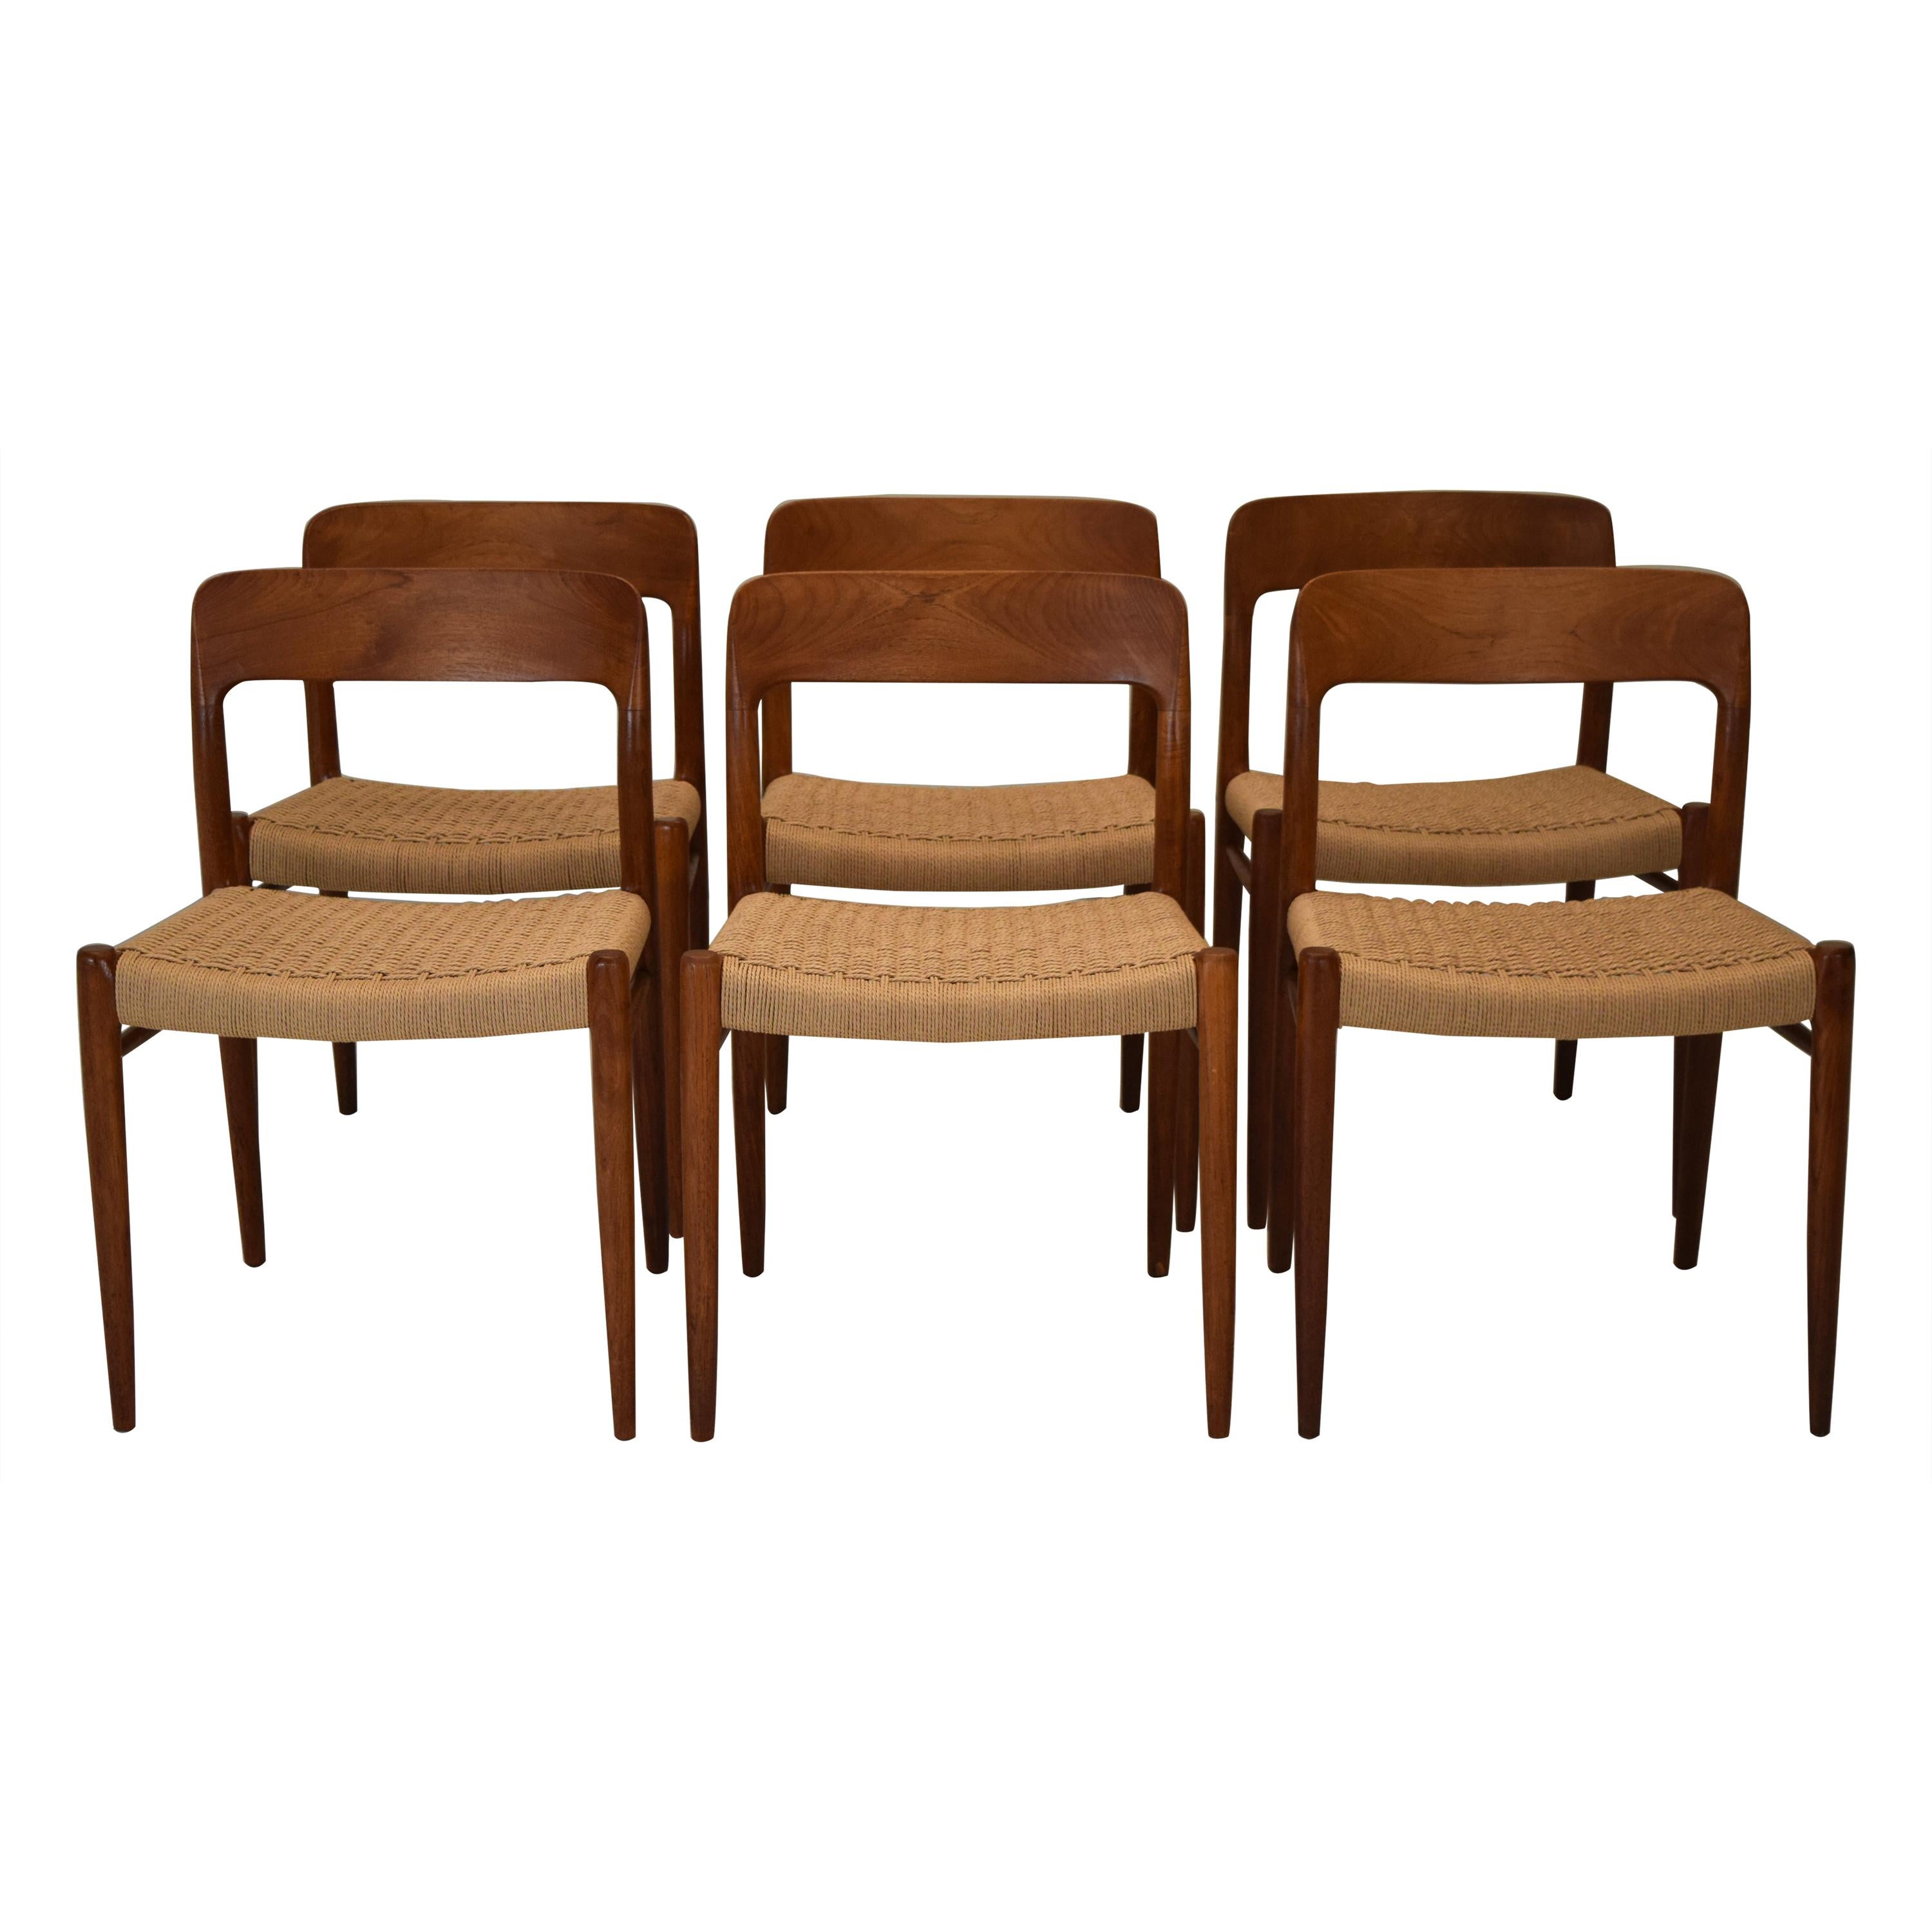 Genuine Neils Moller 75 Chairs with Original 1950s Medallions